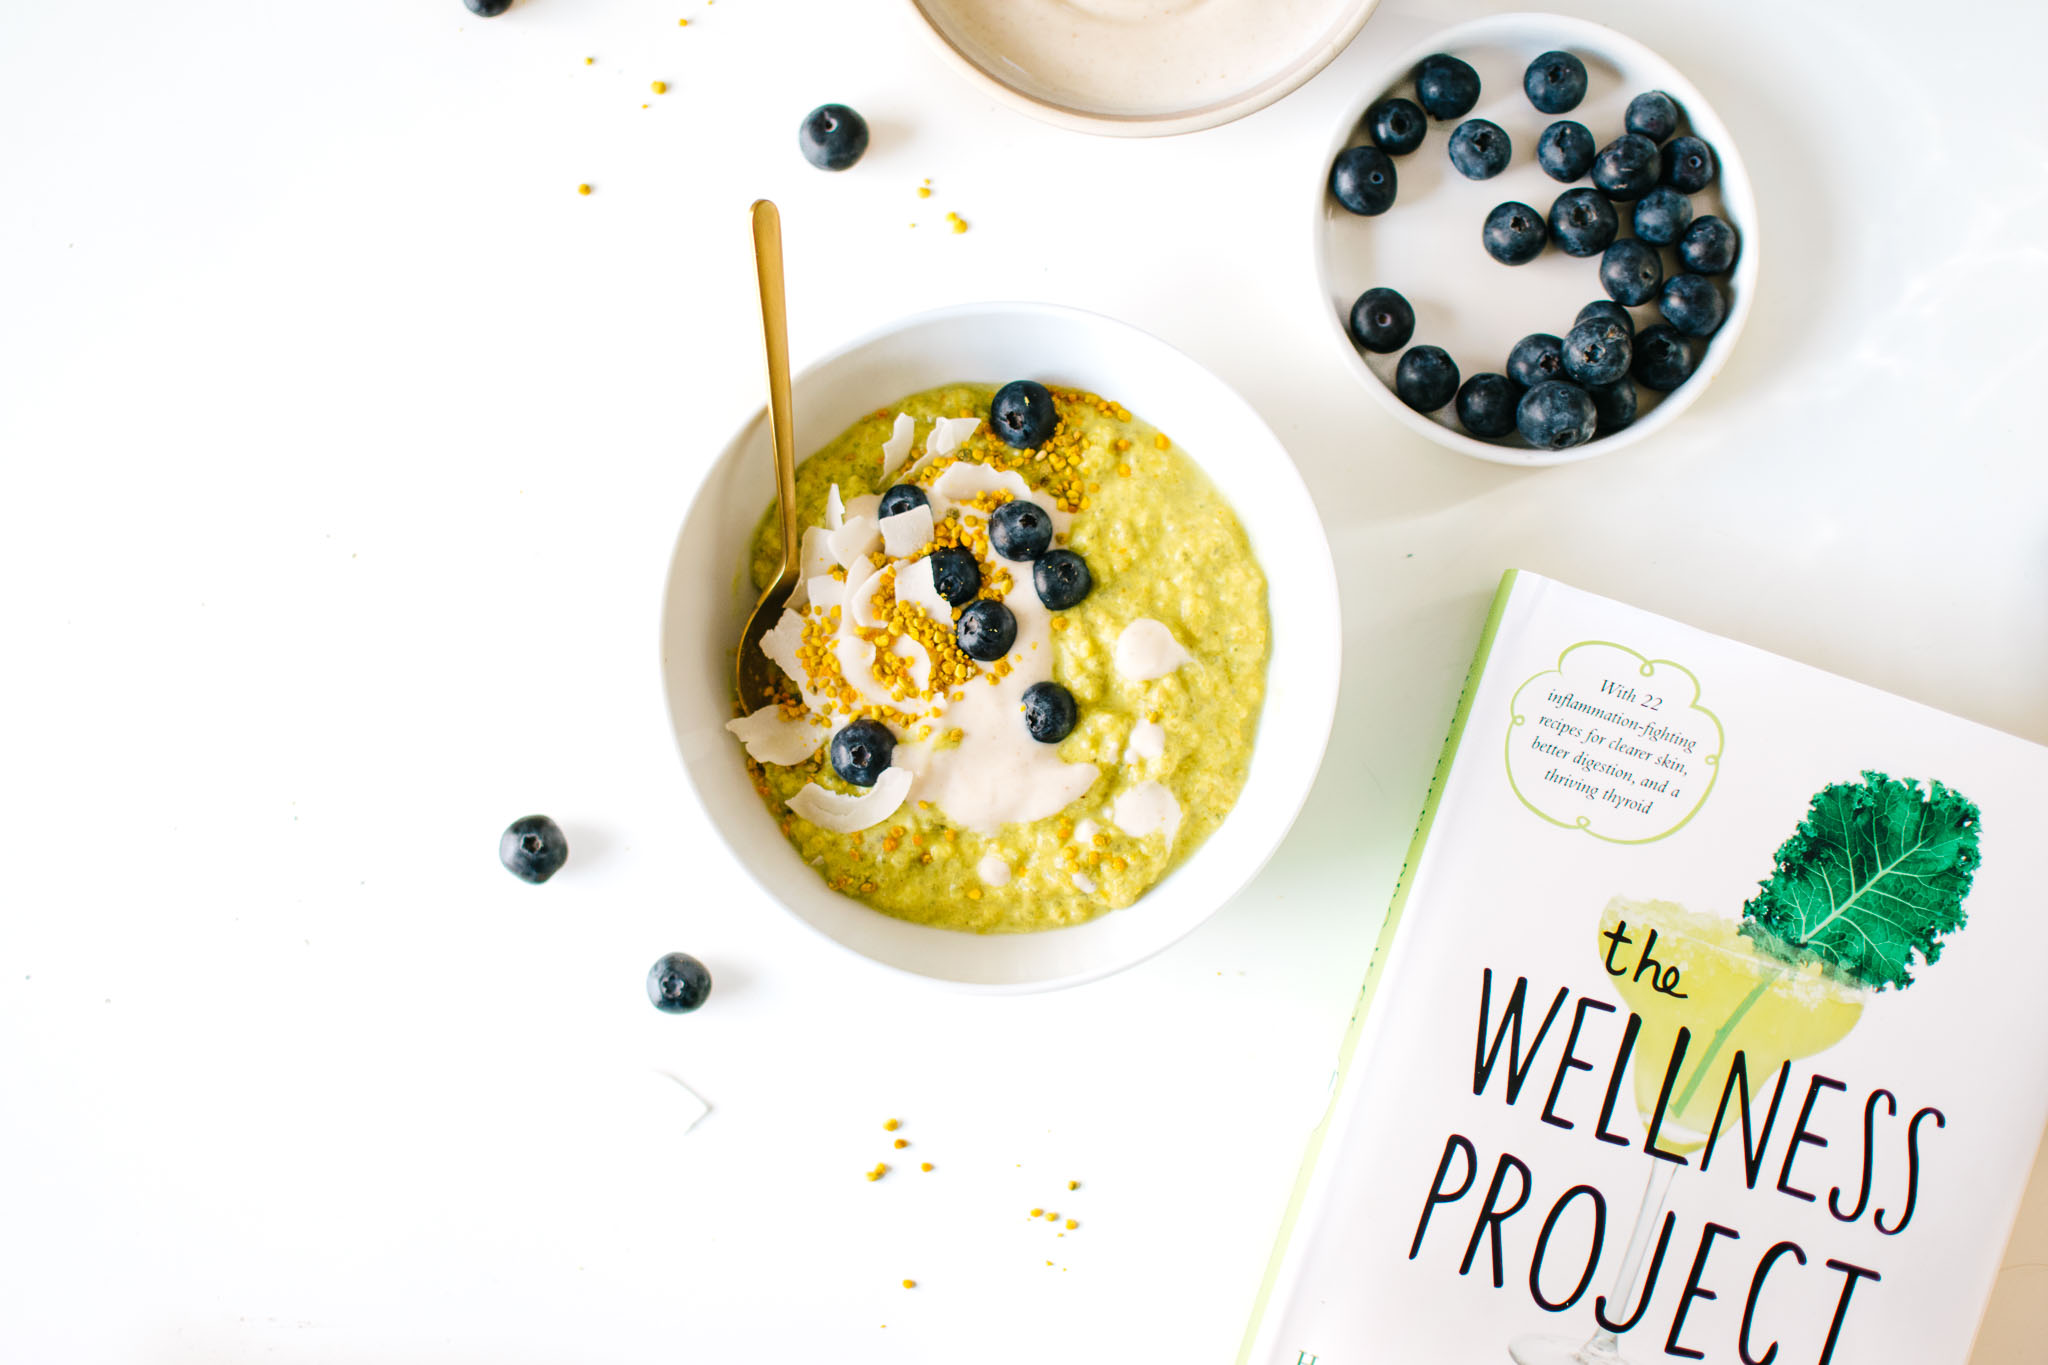 GOLDEN MILK CHIA PUDDING FROM THE WELLNESS PROJECT.